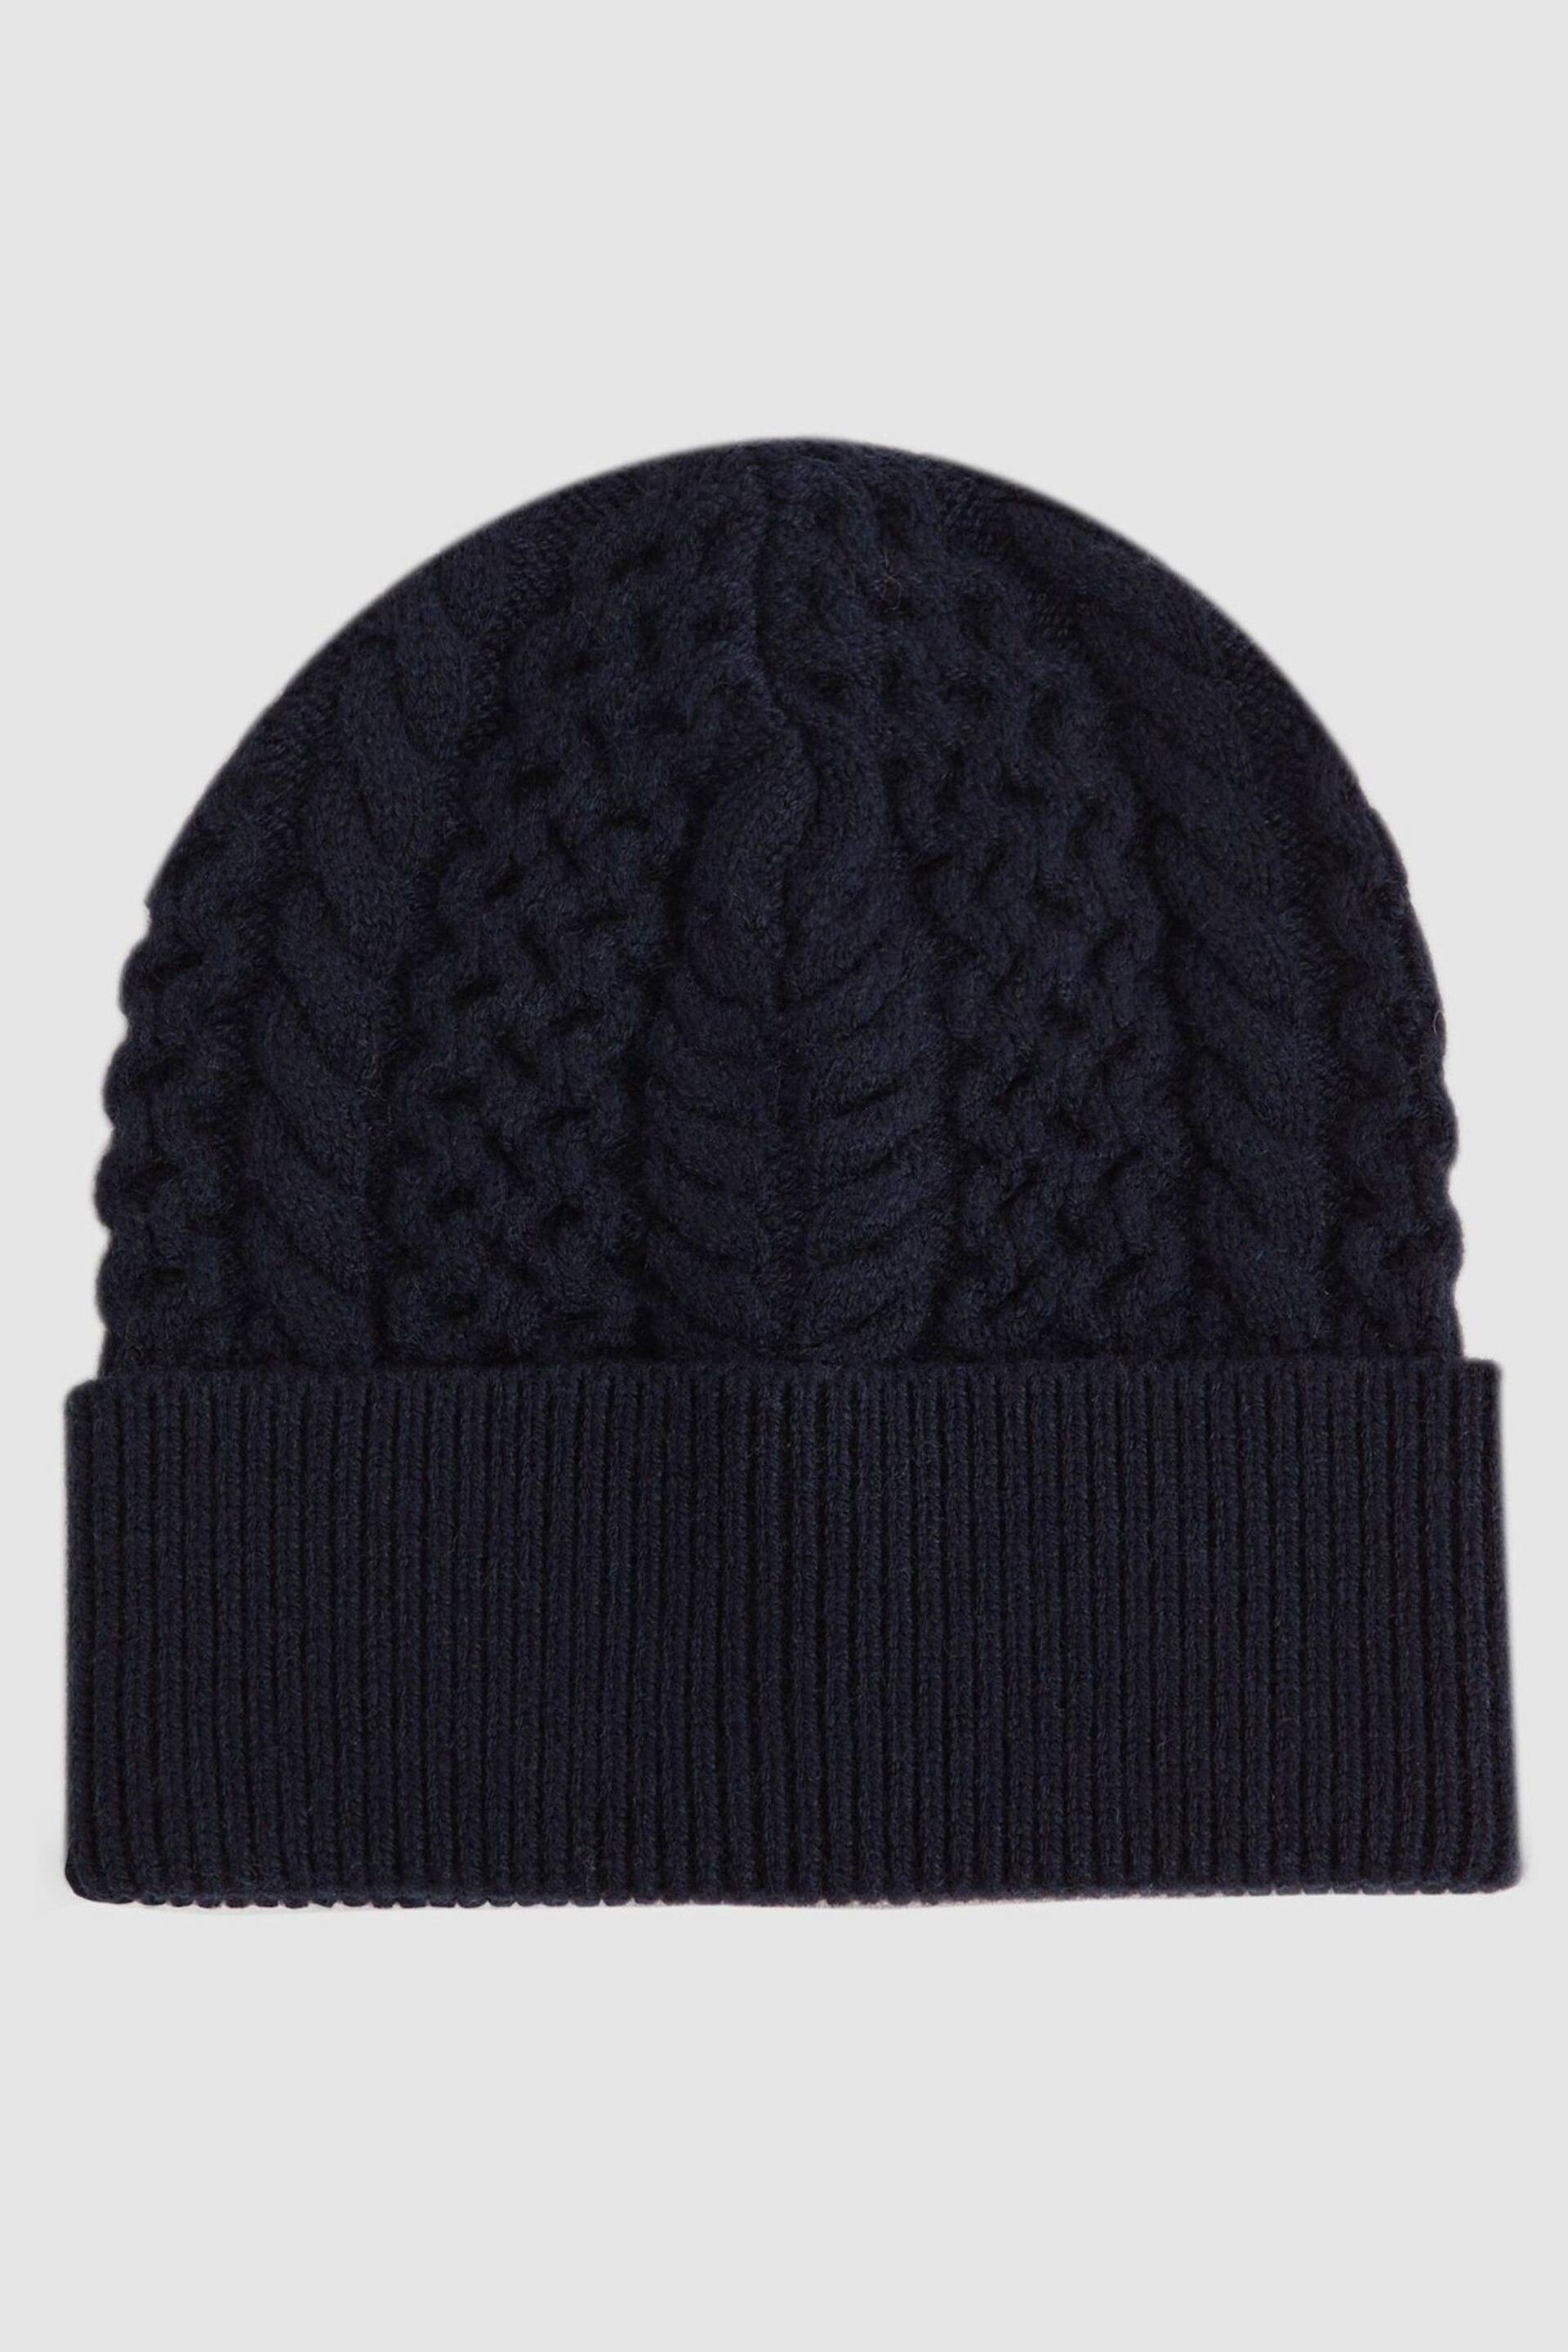 Reiss Navy Heath Junior Knitted Scarf and Beanie Hat Set - Image 3 of 5